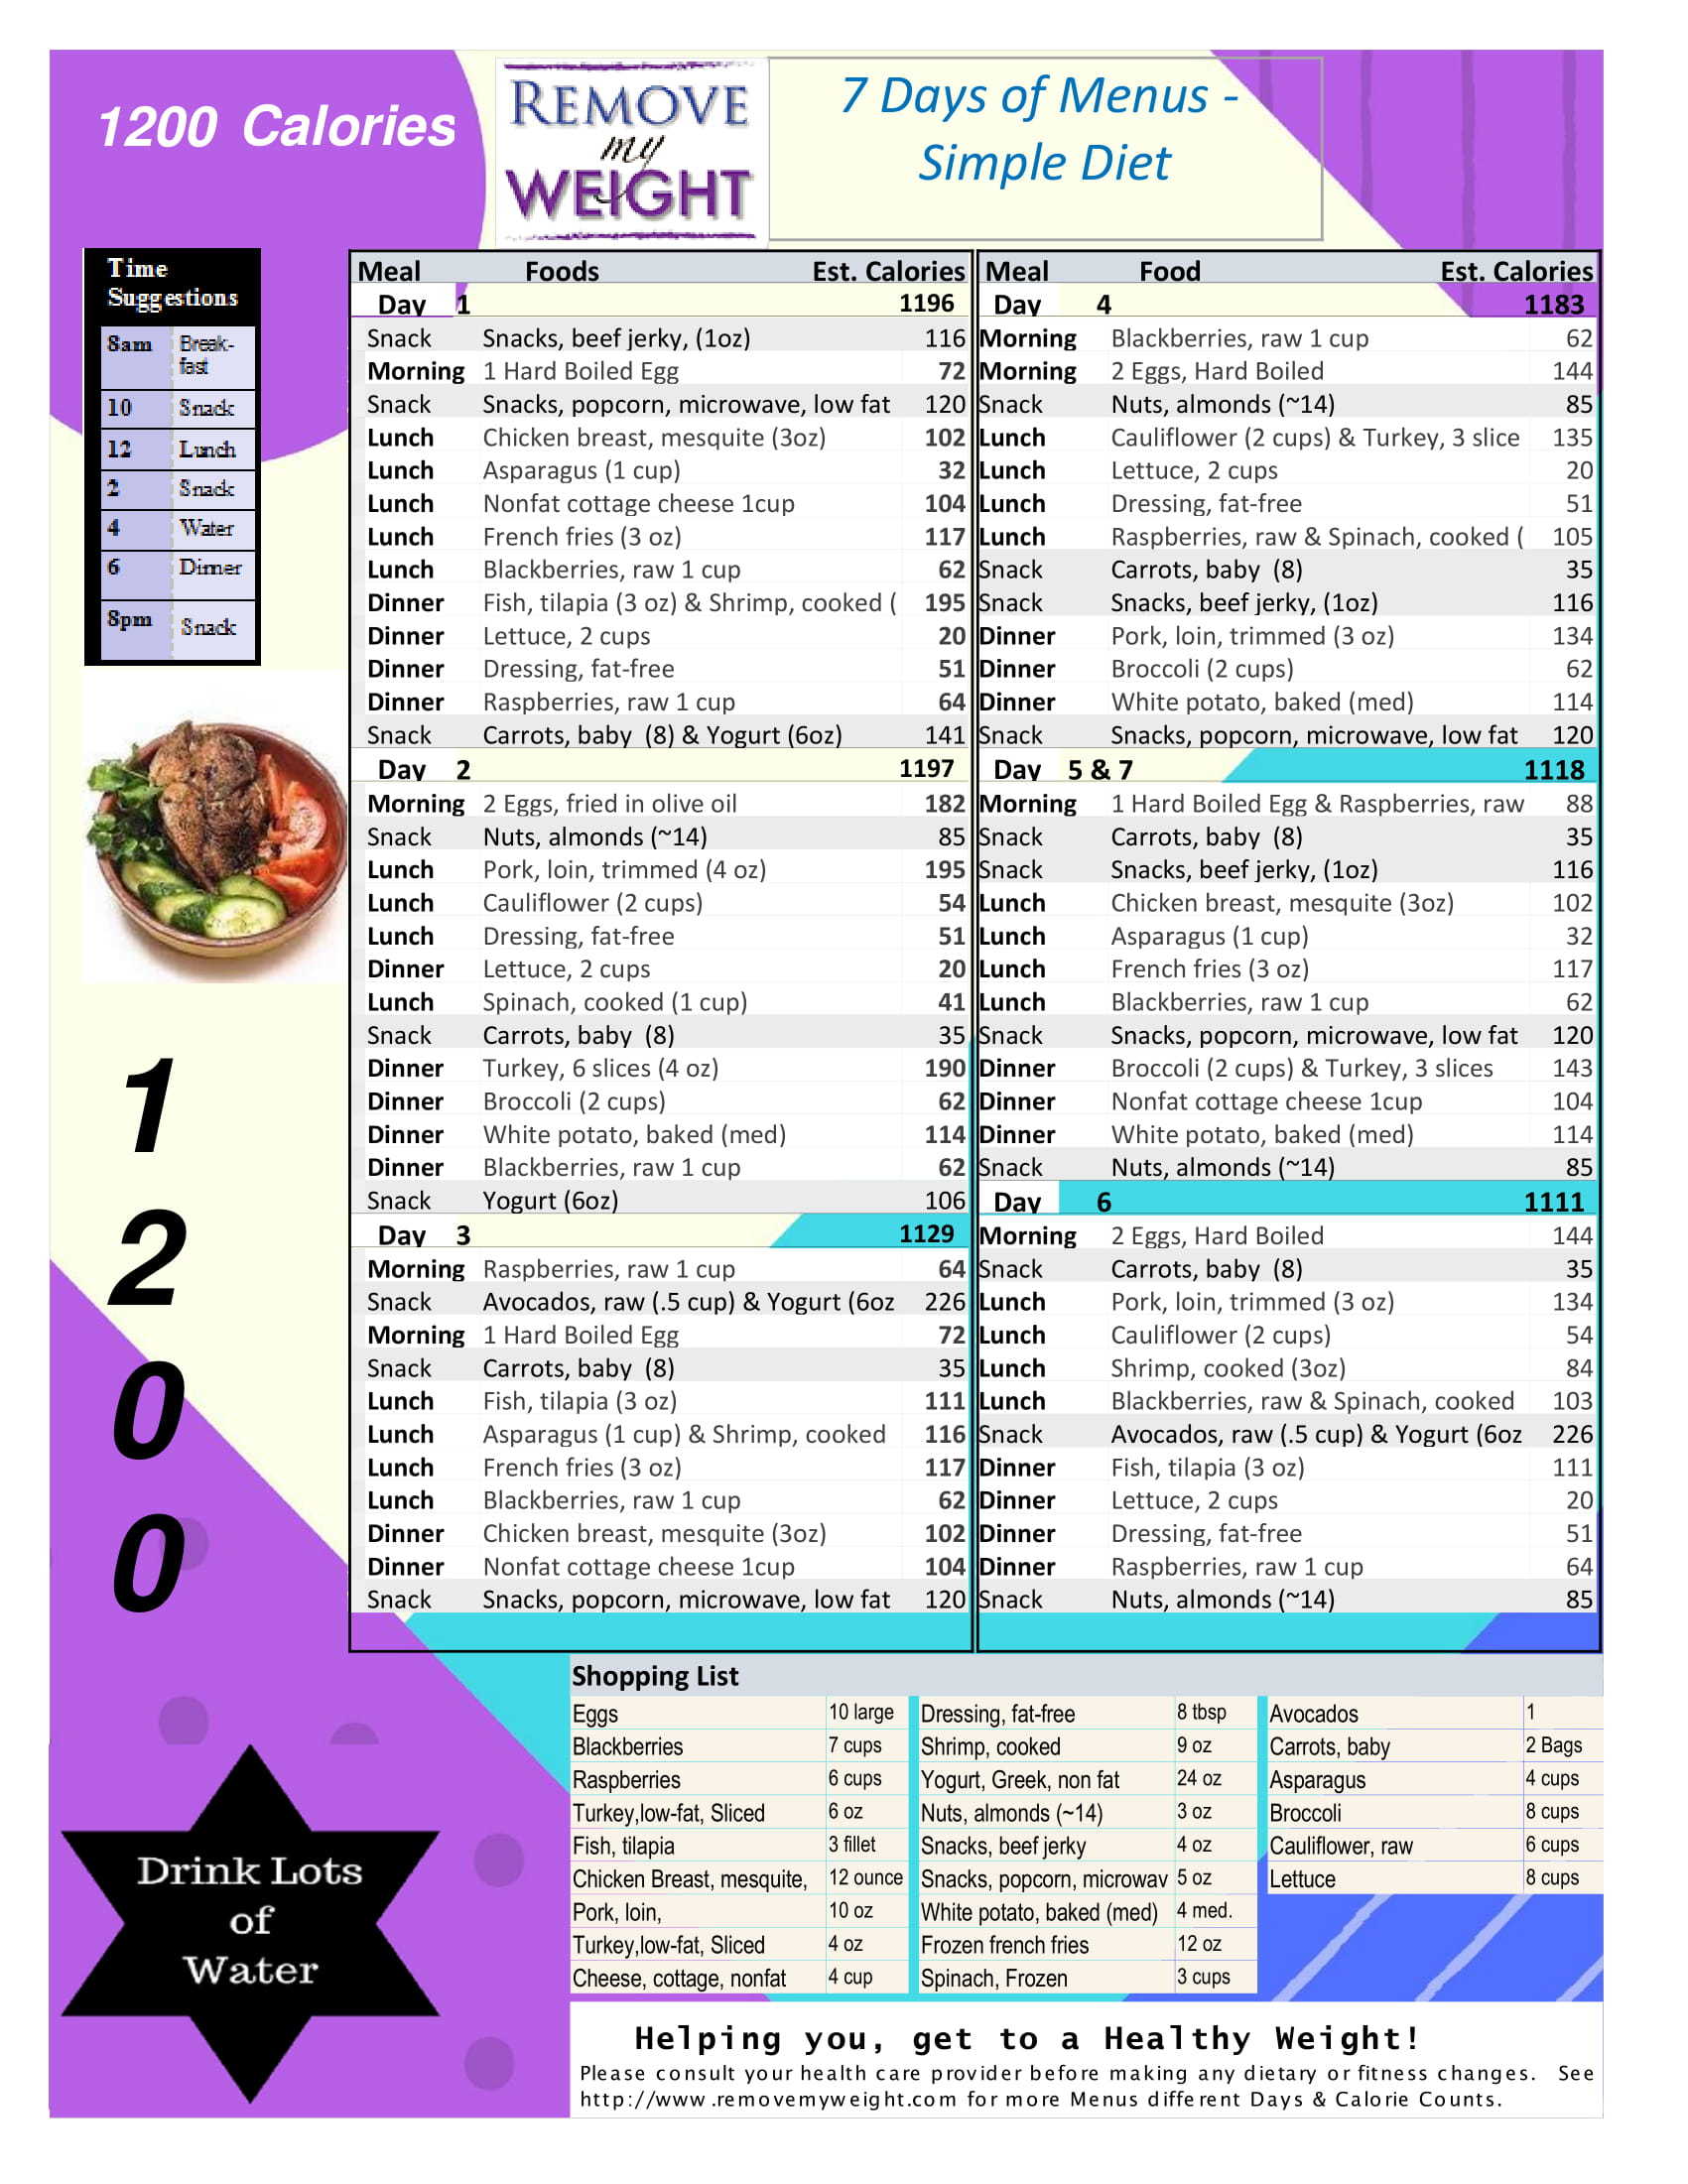 7-day-diet-menu-plan-1200-calories-a-day-simple-menu-plan-for-weight-loss